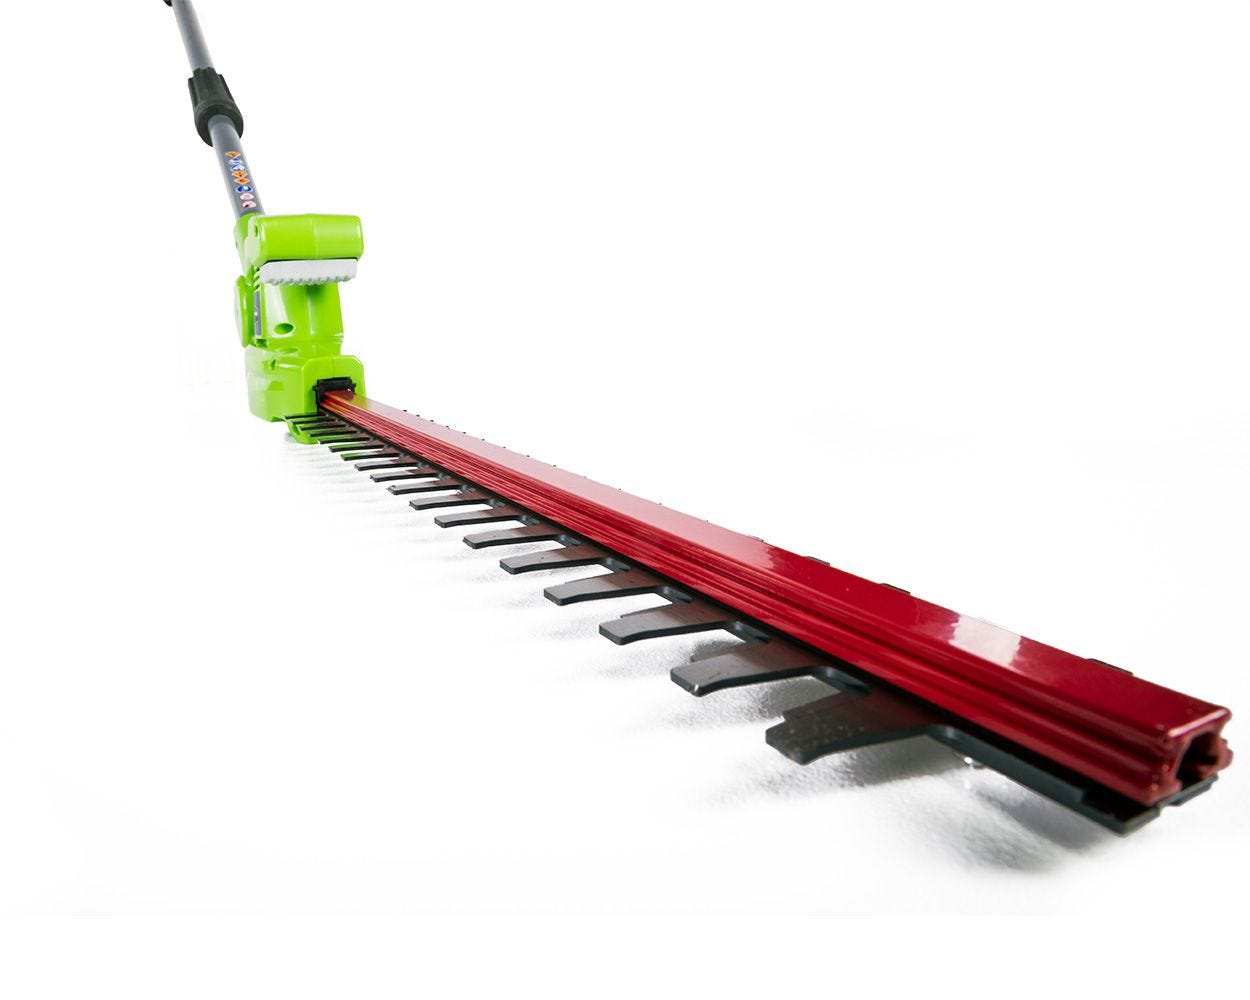 Pulsar 40V Lithium-iON Cordless Hedge Trimmer